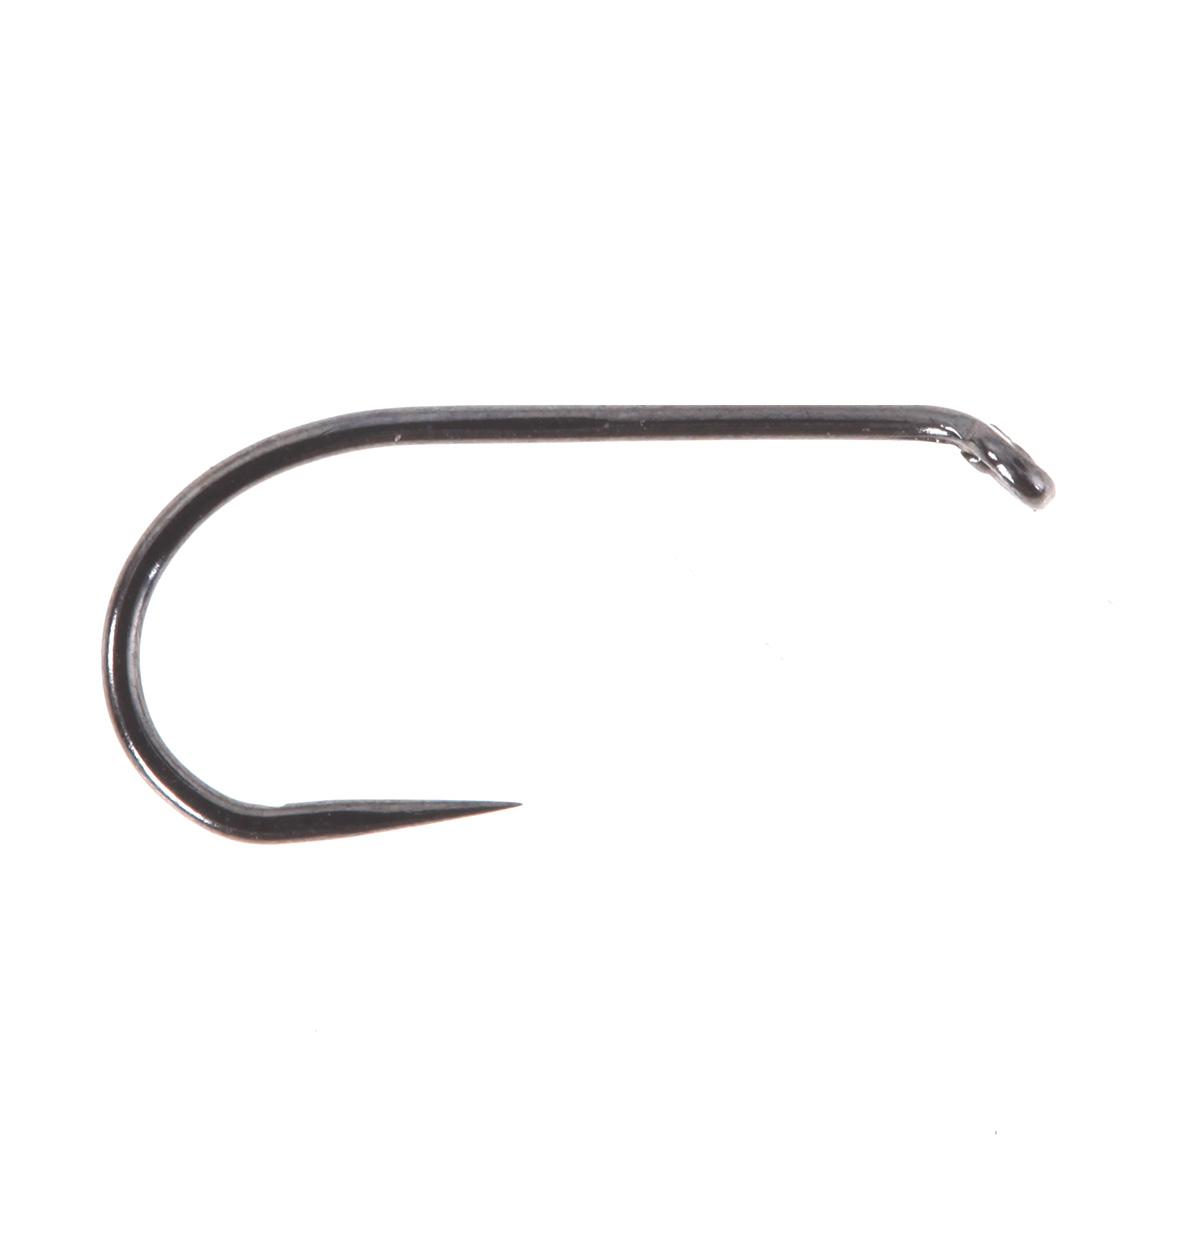 Partridge SUD2 Patriot Ideal Standard Dry Barbless